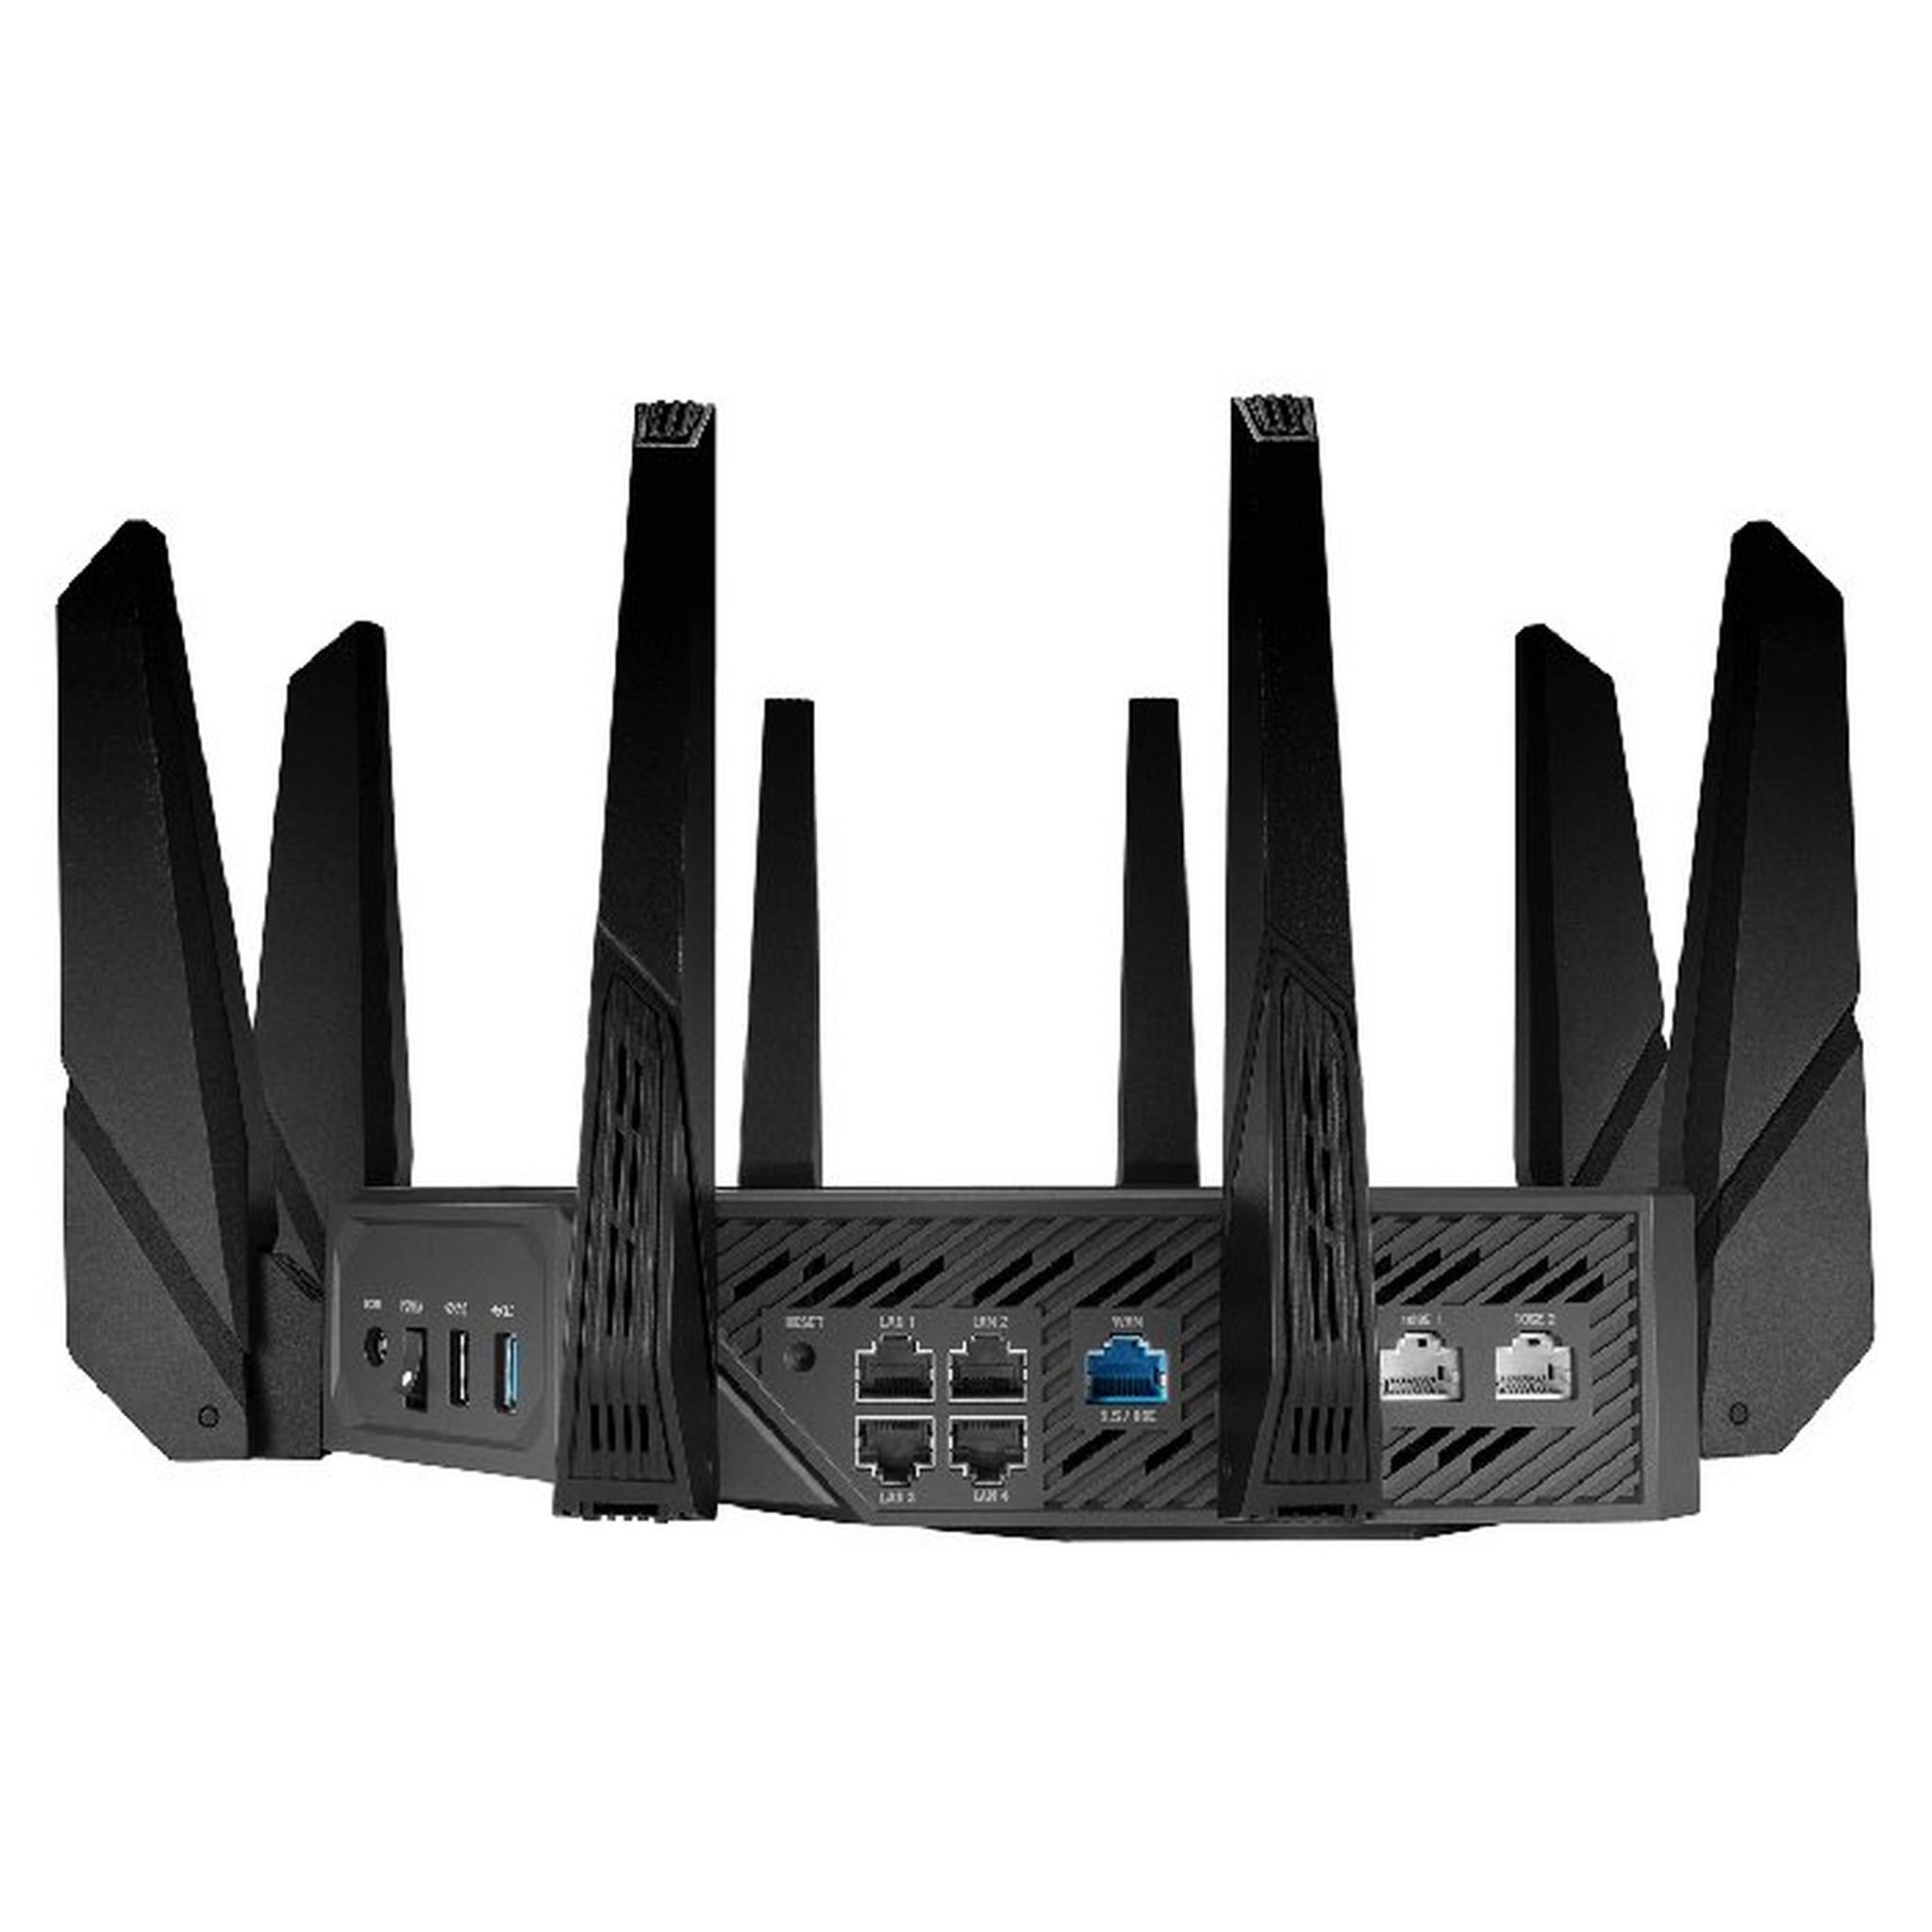 ASUS ROG Rapture Gaming Router, Wi-Fi 6E, Tri-Band, AXE16000